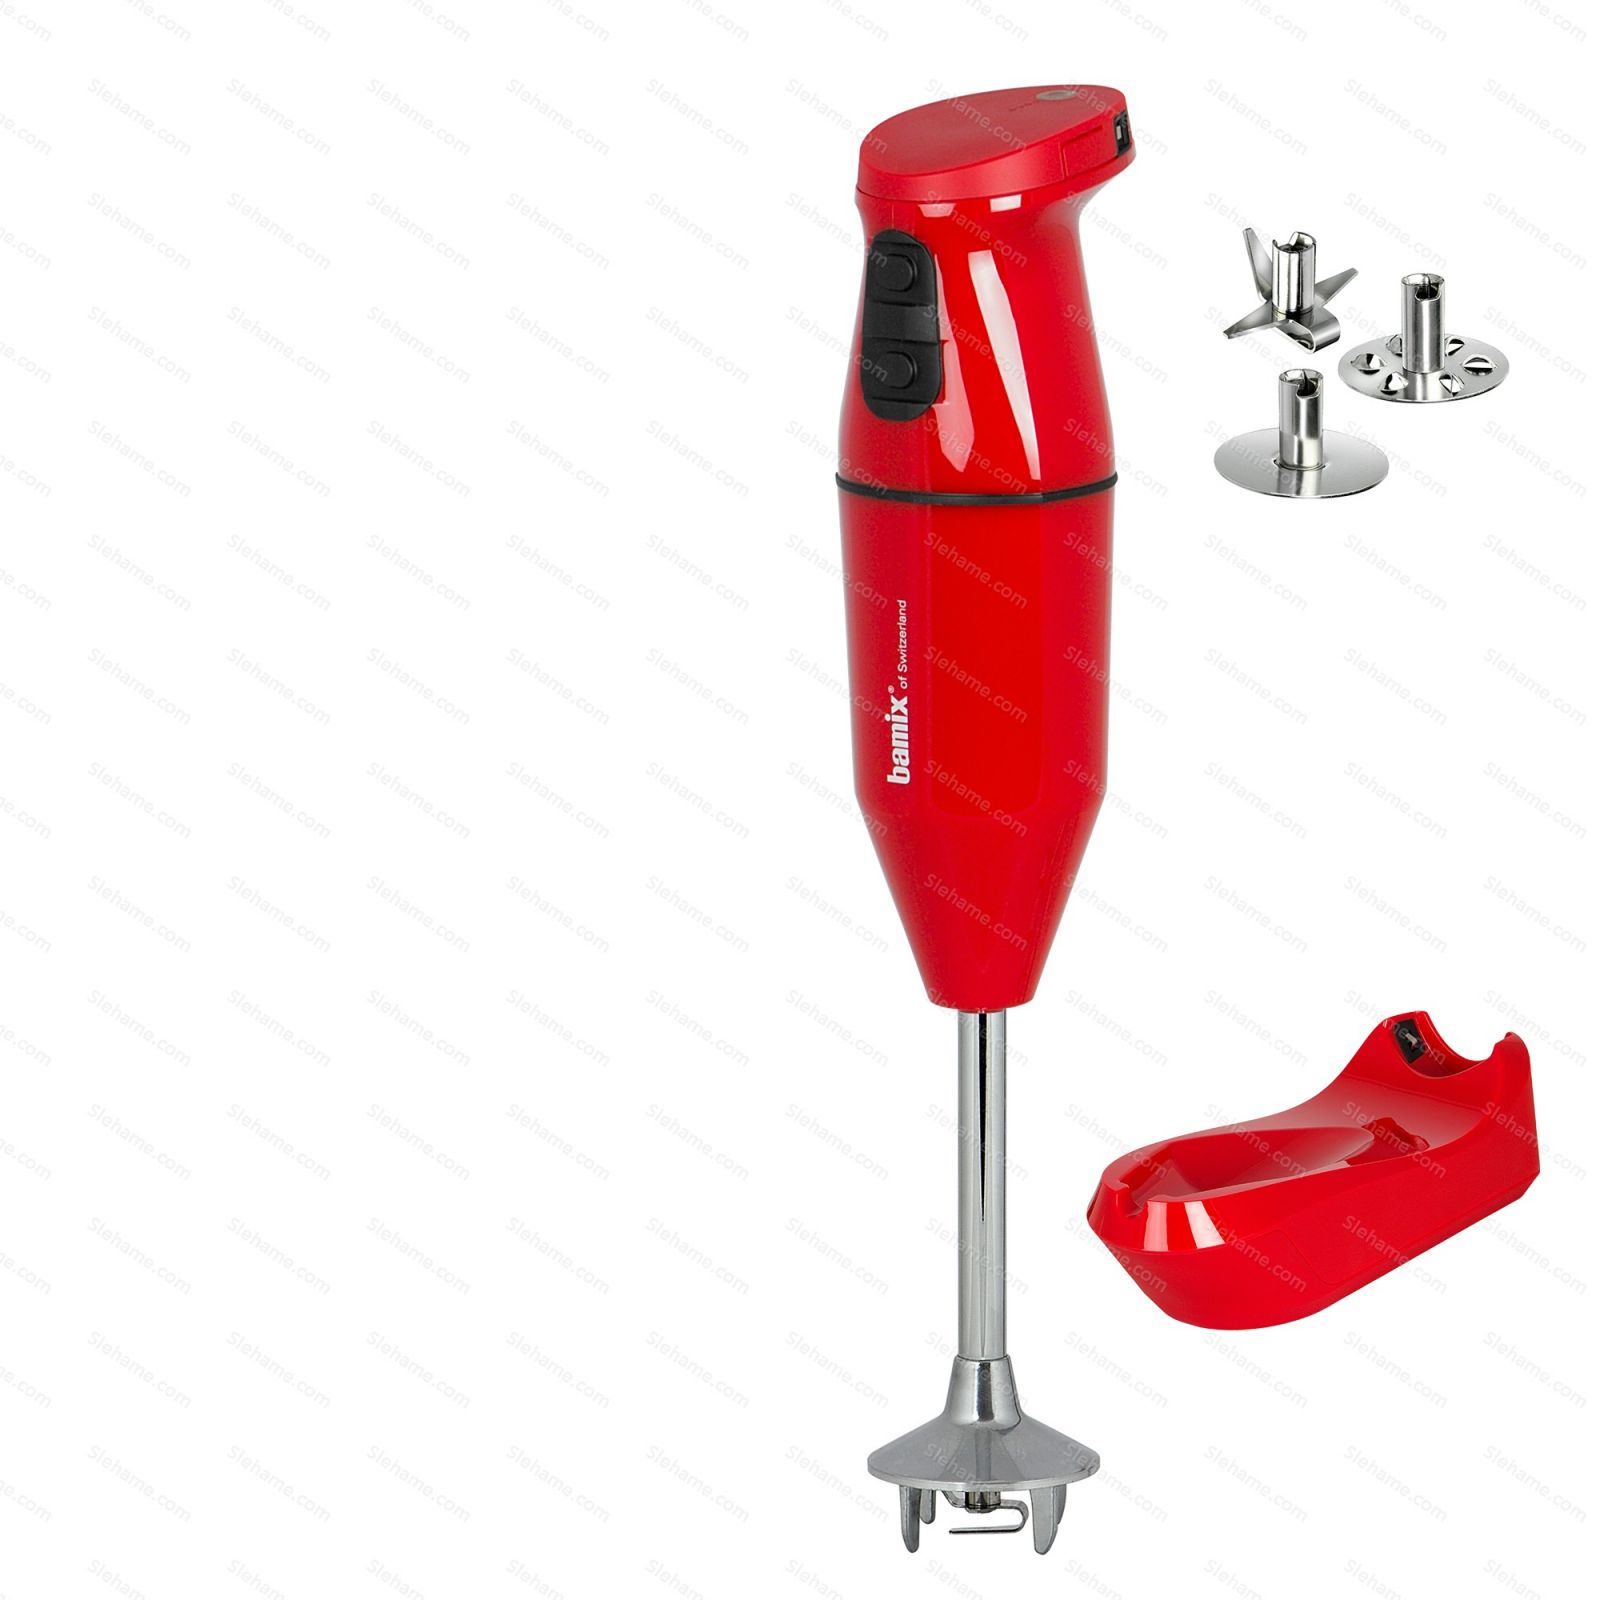 Wireless stick blender bamix CORDLESS PLUS, red - package content